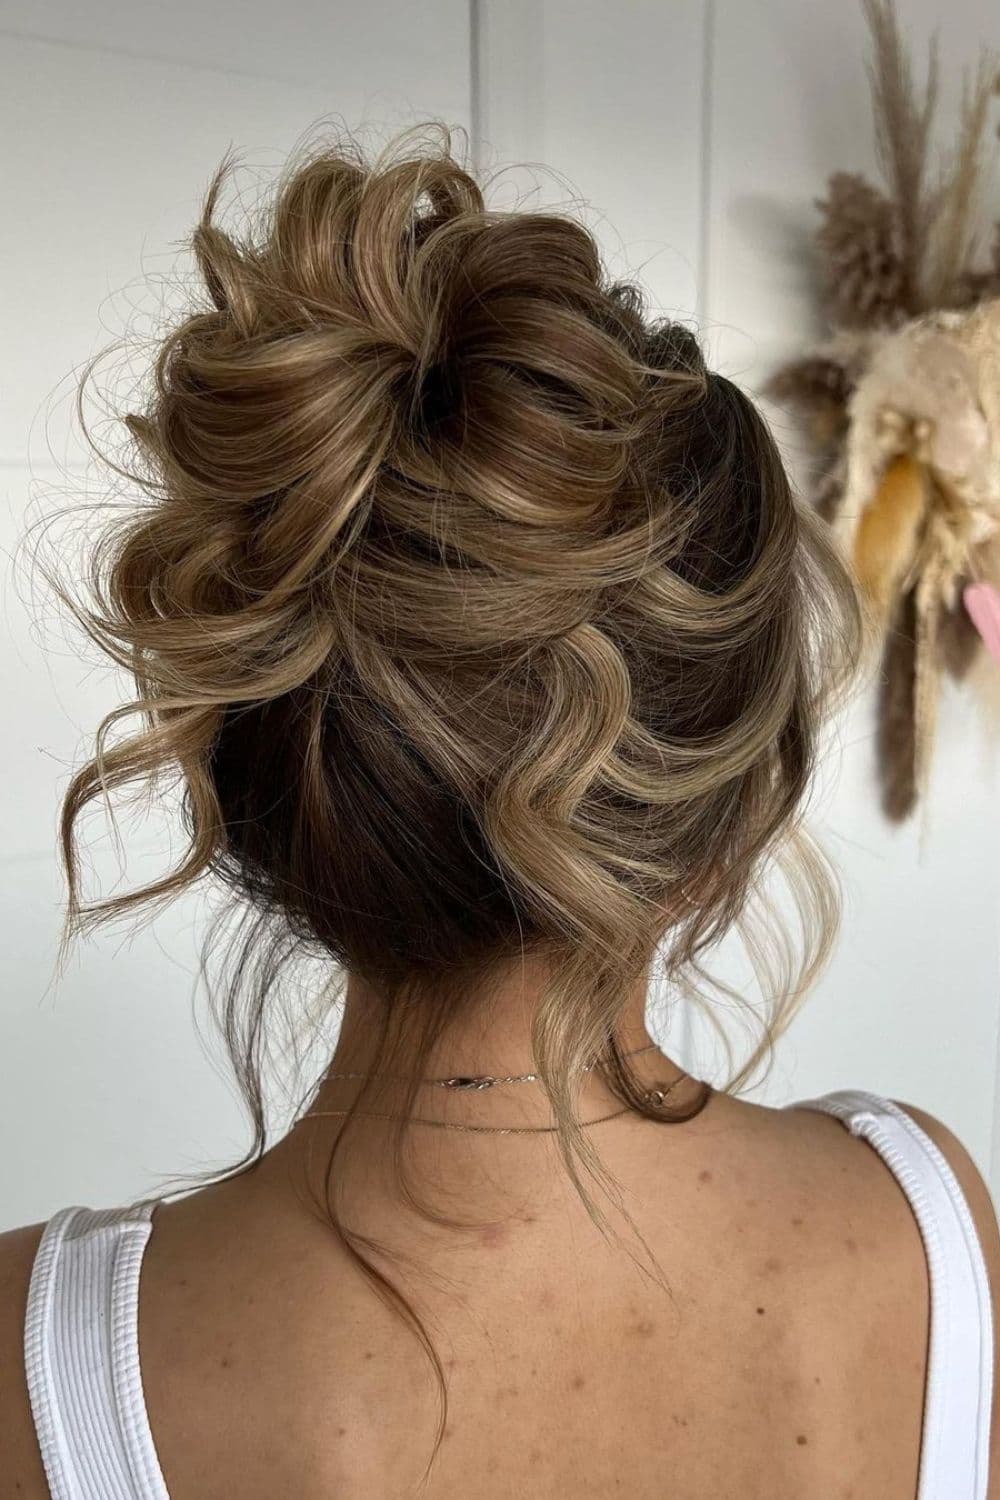 A woman with a high bun with loose curls.